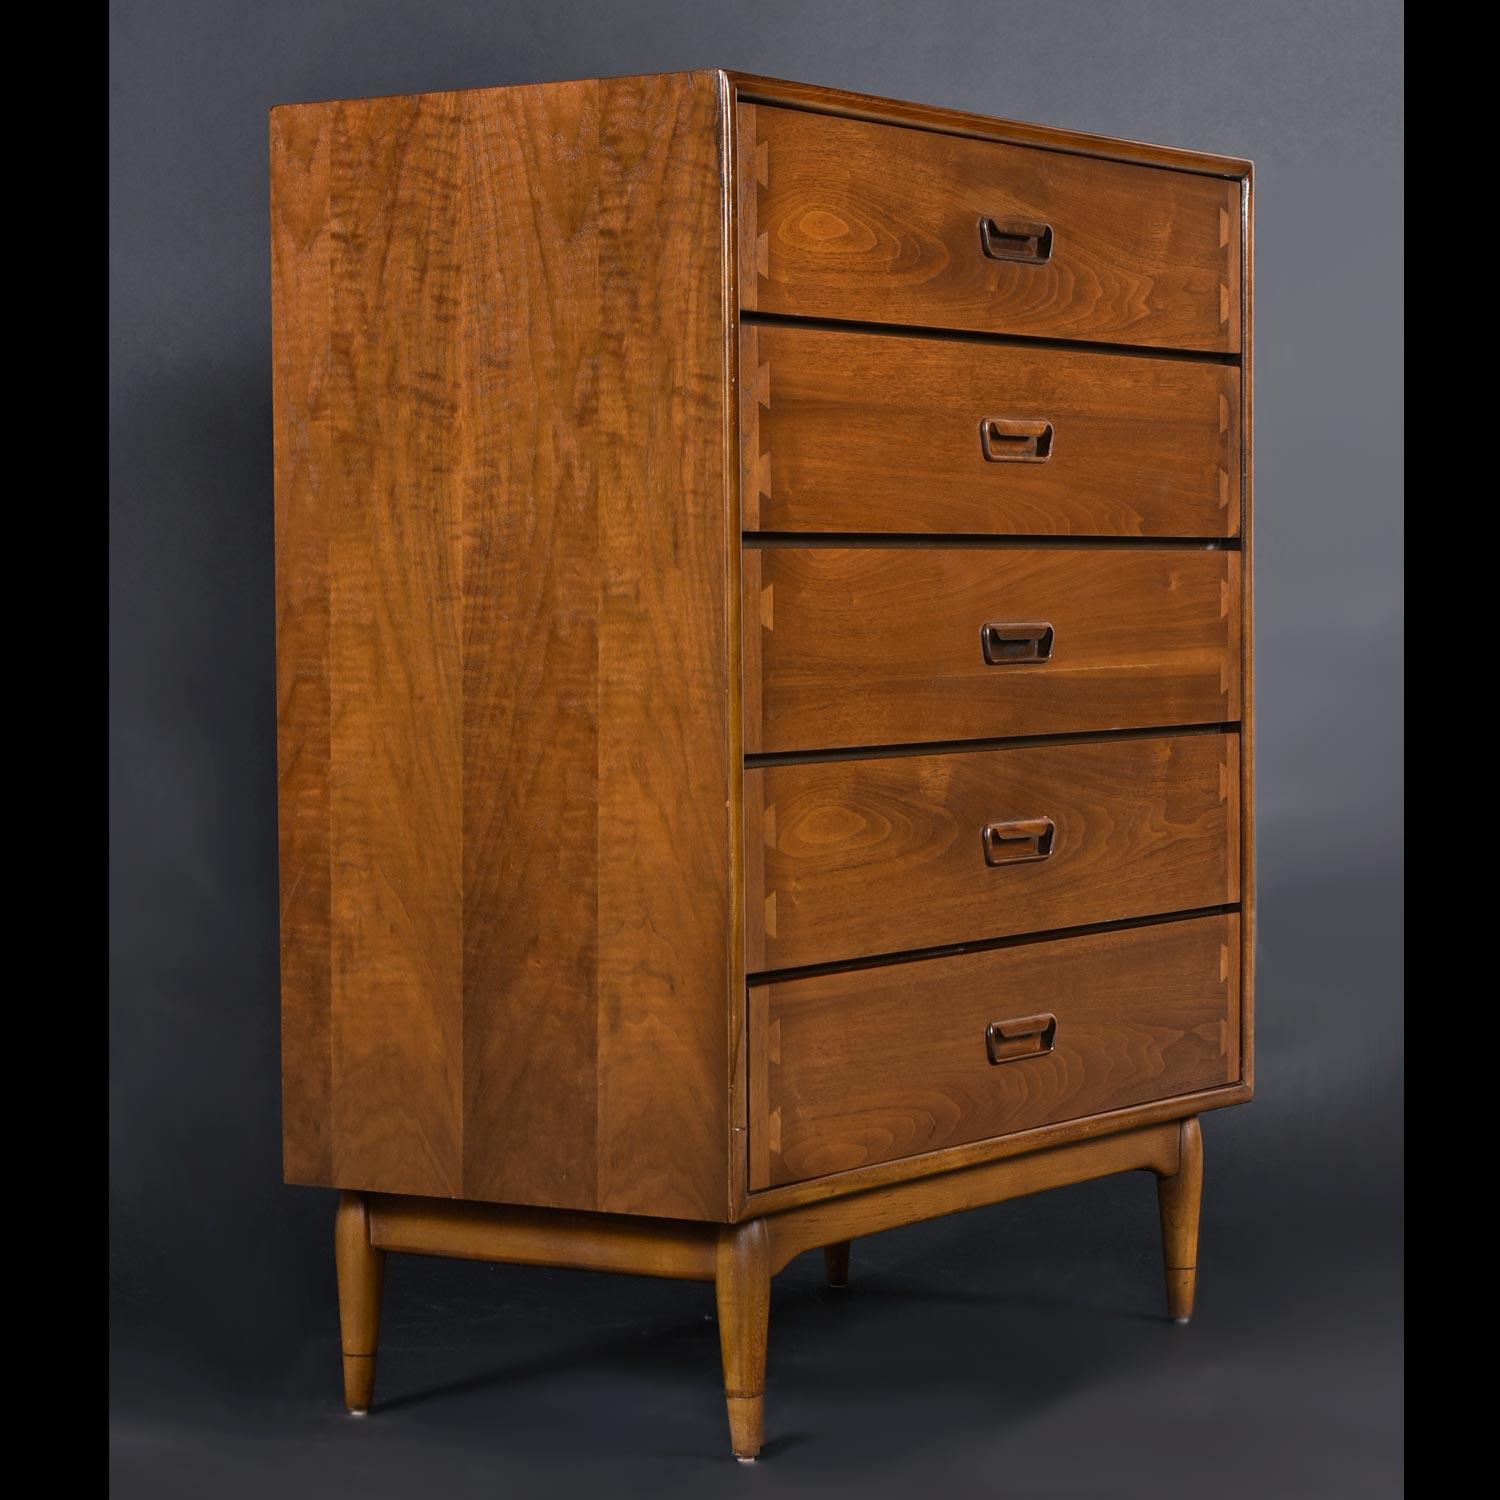 This is a seriously hard-to-find model. The Acclaim bedroom case pieces seldom come to market. After a decade in the MCM furniture business, this is the first one we’ve had on our showroom. Much like the trademark dovetails, the dark tawny recessed